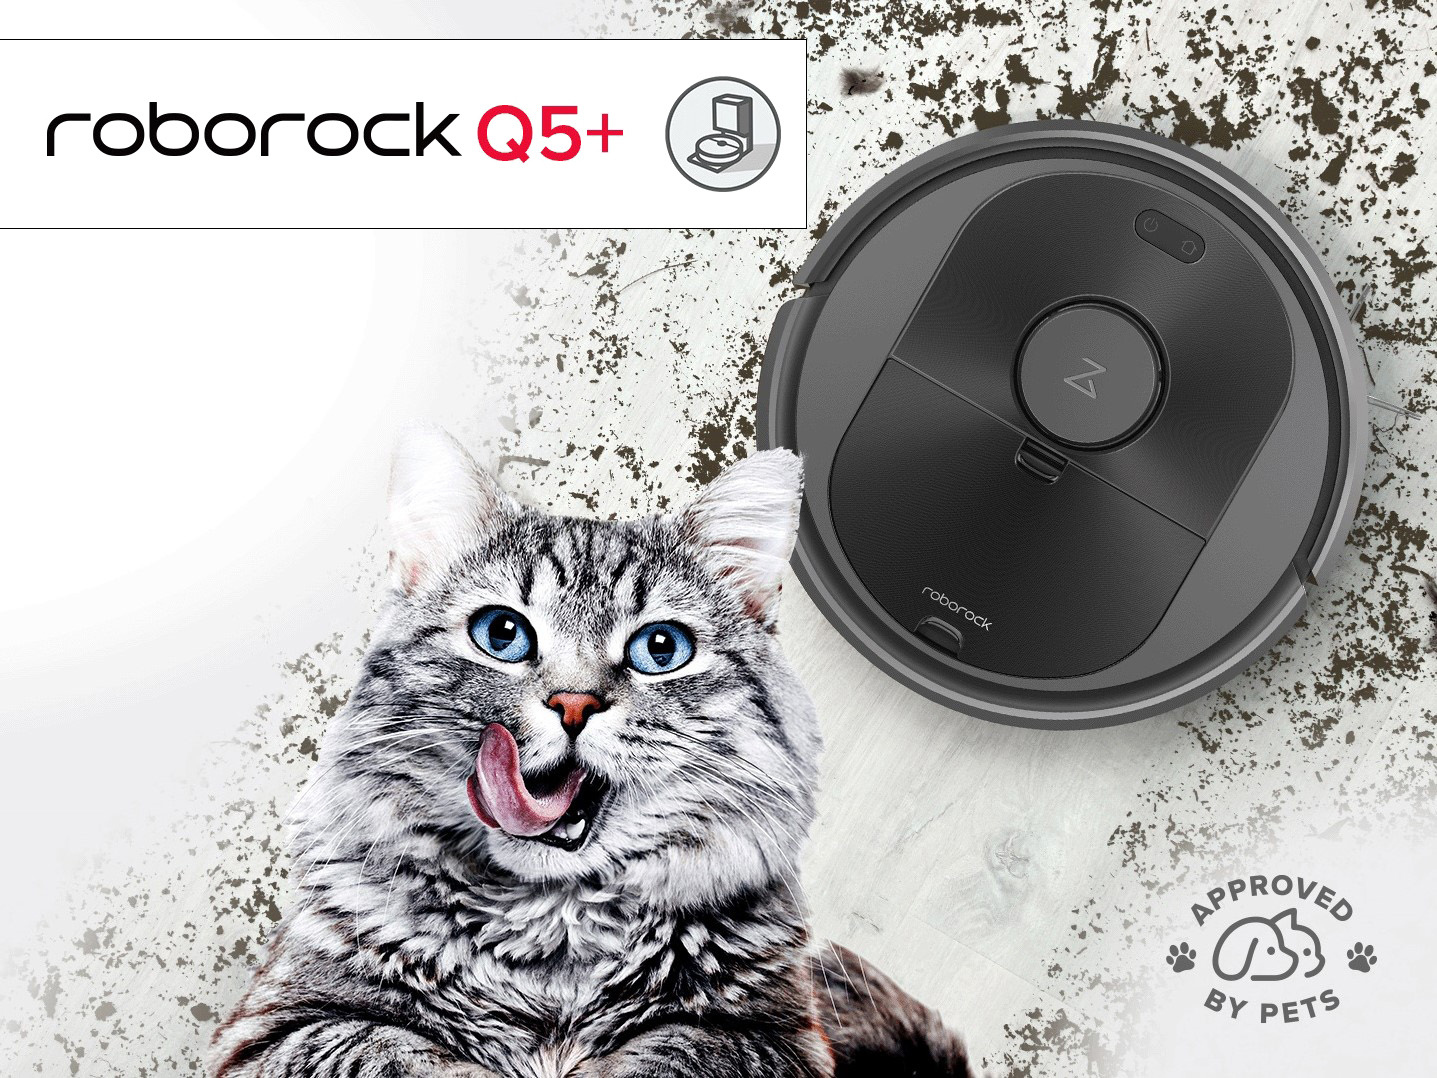 https://www.pawtracks.com/wp-content/uploads/sites/2/2022/07/Roborock-Q5-with-cat-and-dirty-floor.jpg?fit=1024%2C1024&p=1